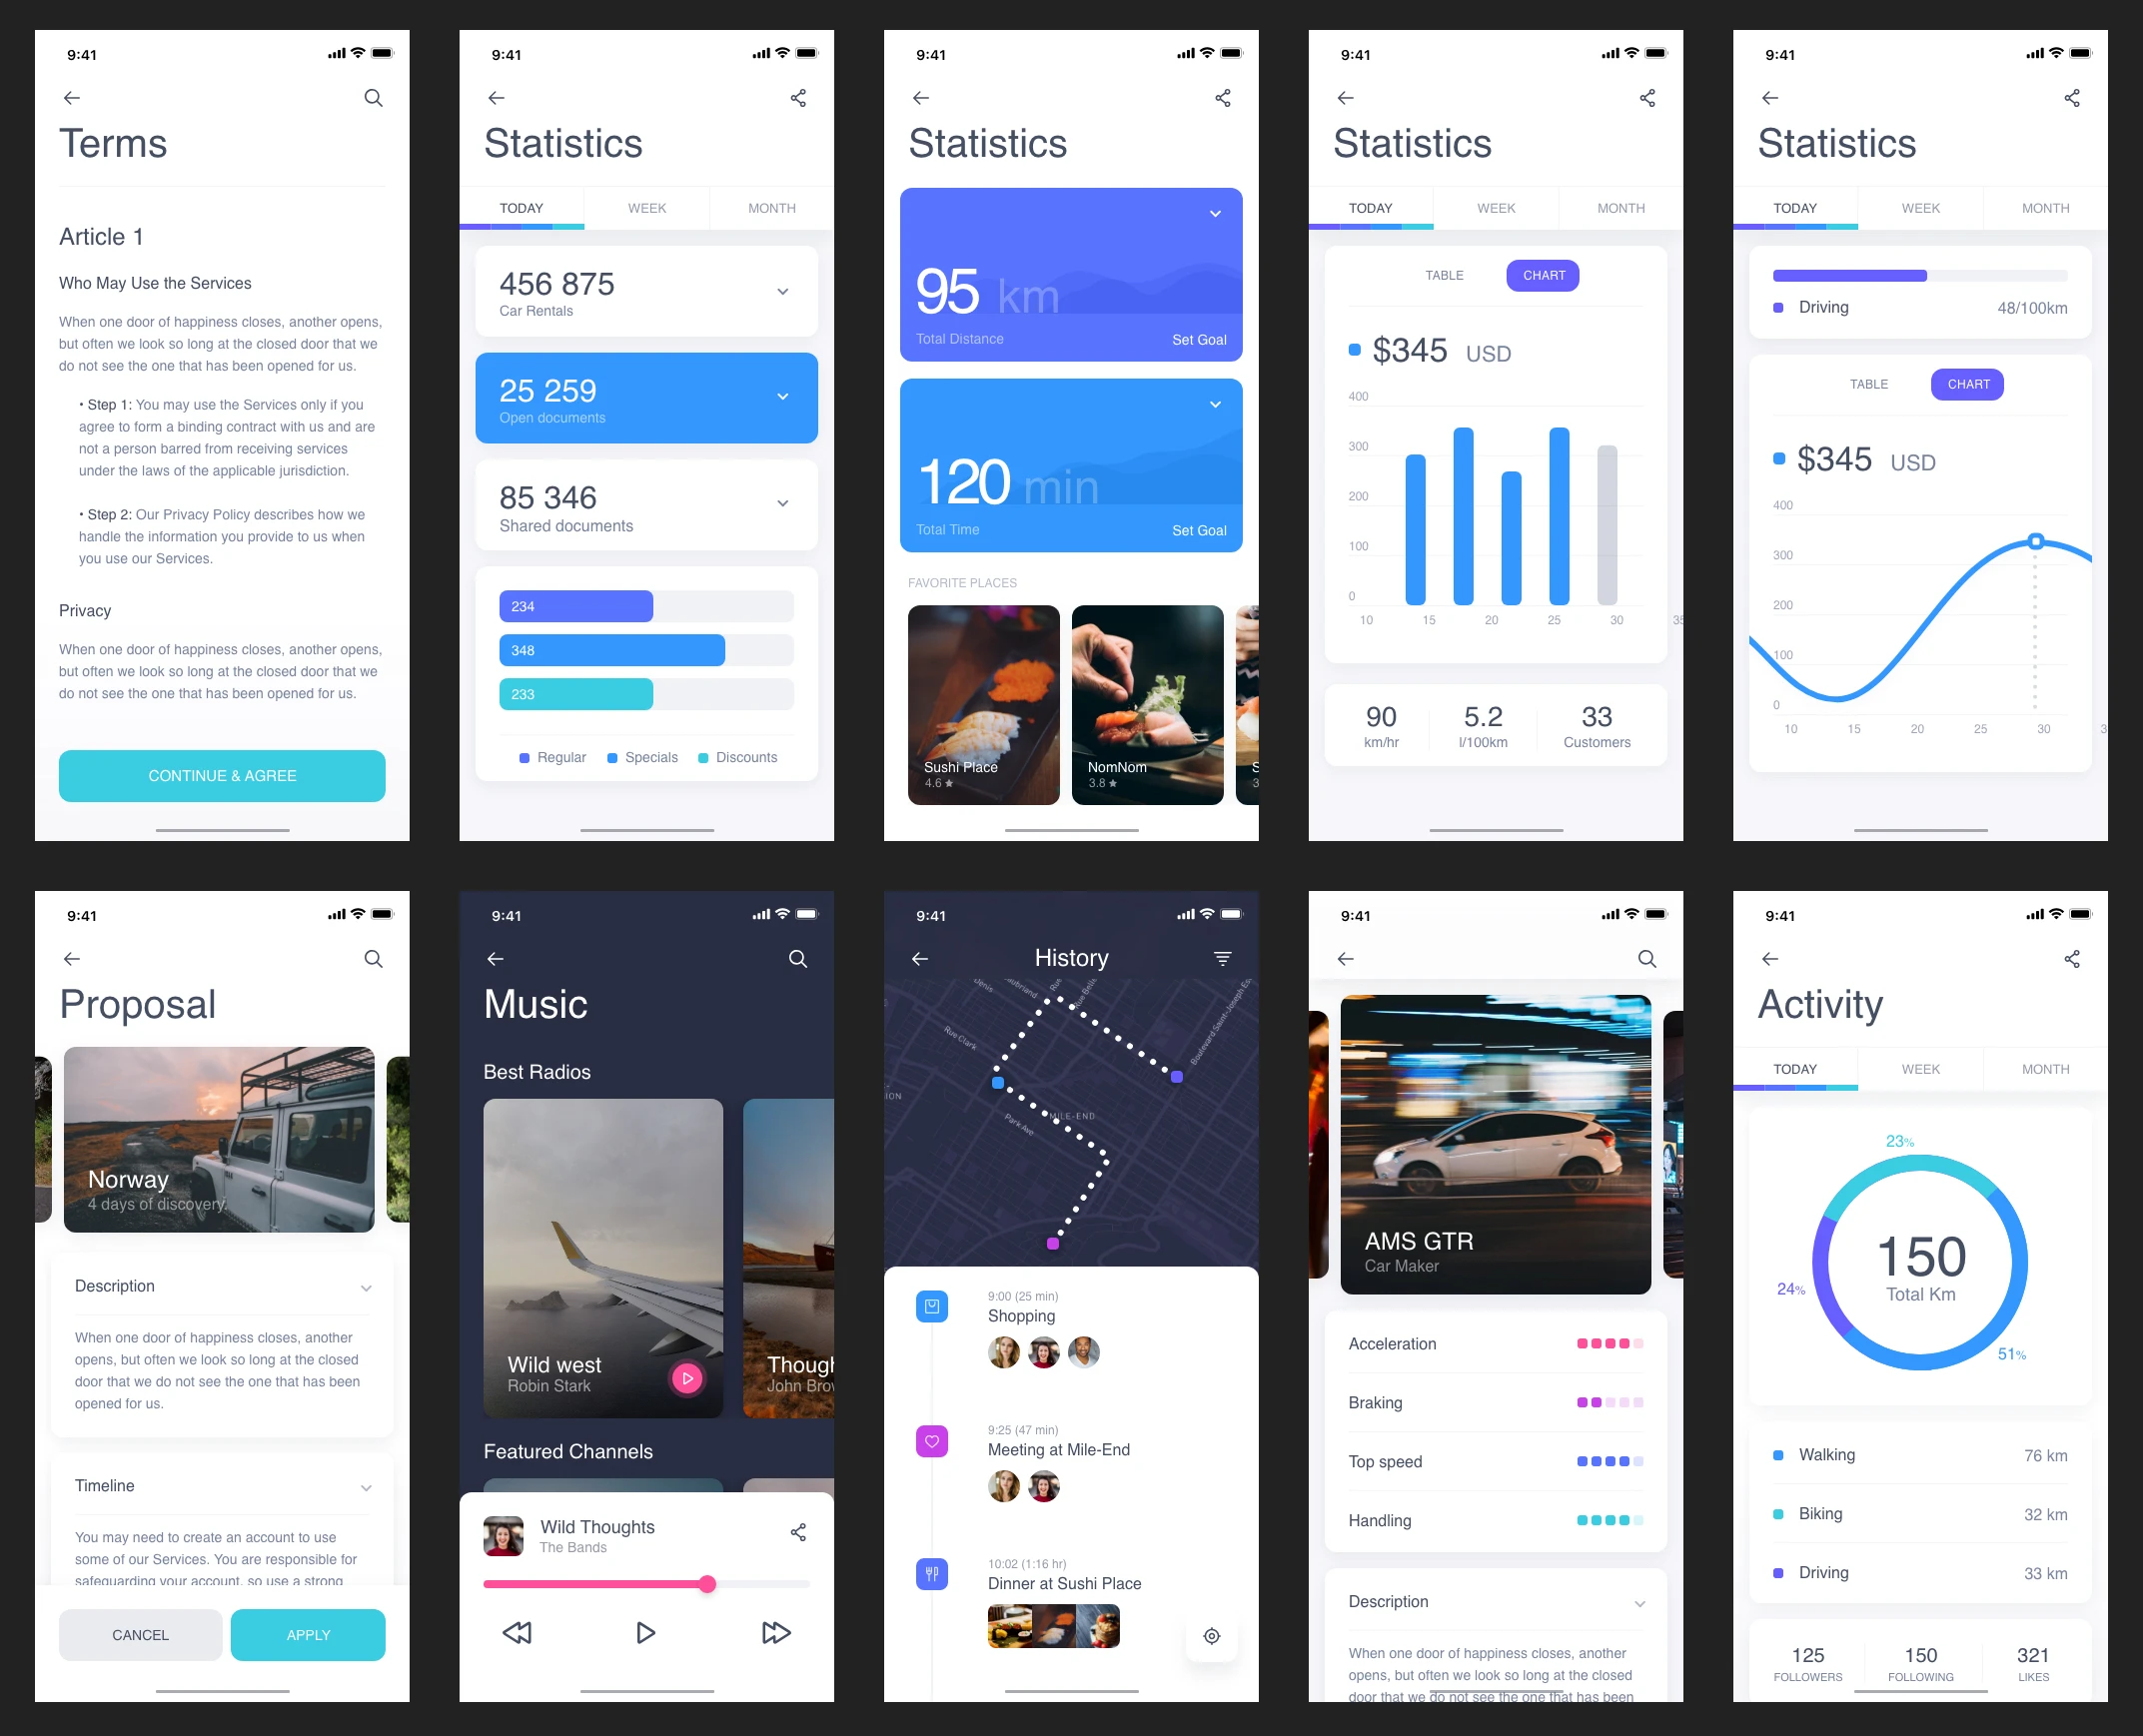 Navigo UI Kit for Adobe XD - Navigo is a free iOS UI Kit made for Adobe XD. It includes more than 60 screens organized in 6 categories and designed with a modern and colorful style.